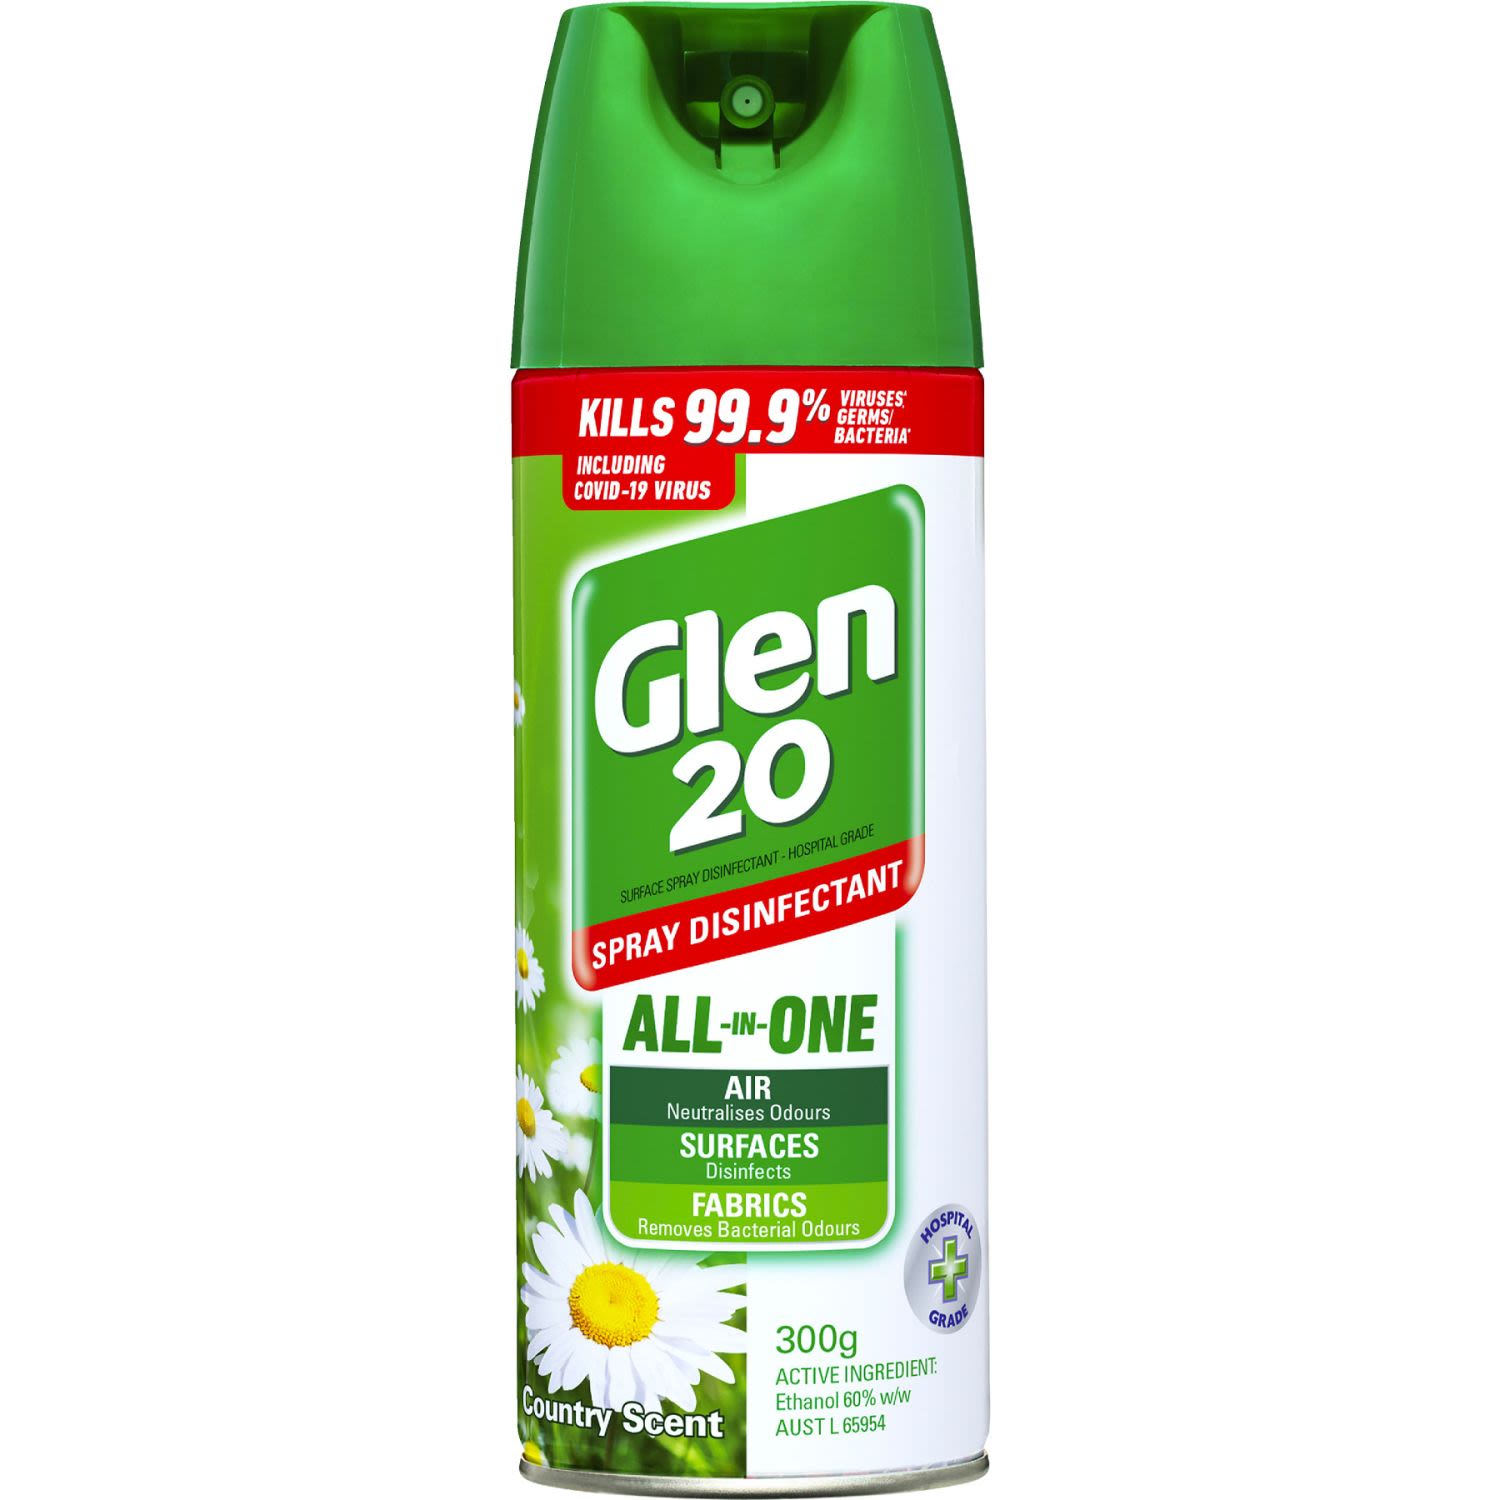 Glen 20 All-In-One Disinfectant Spray Country Scent, 300 Gram